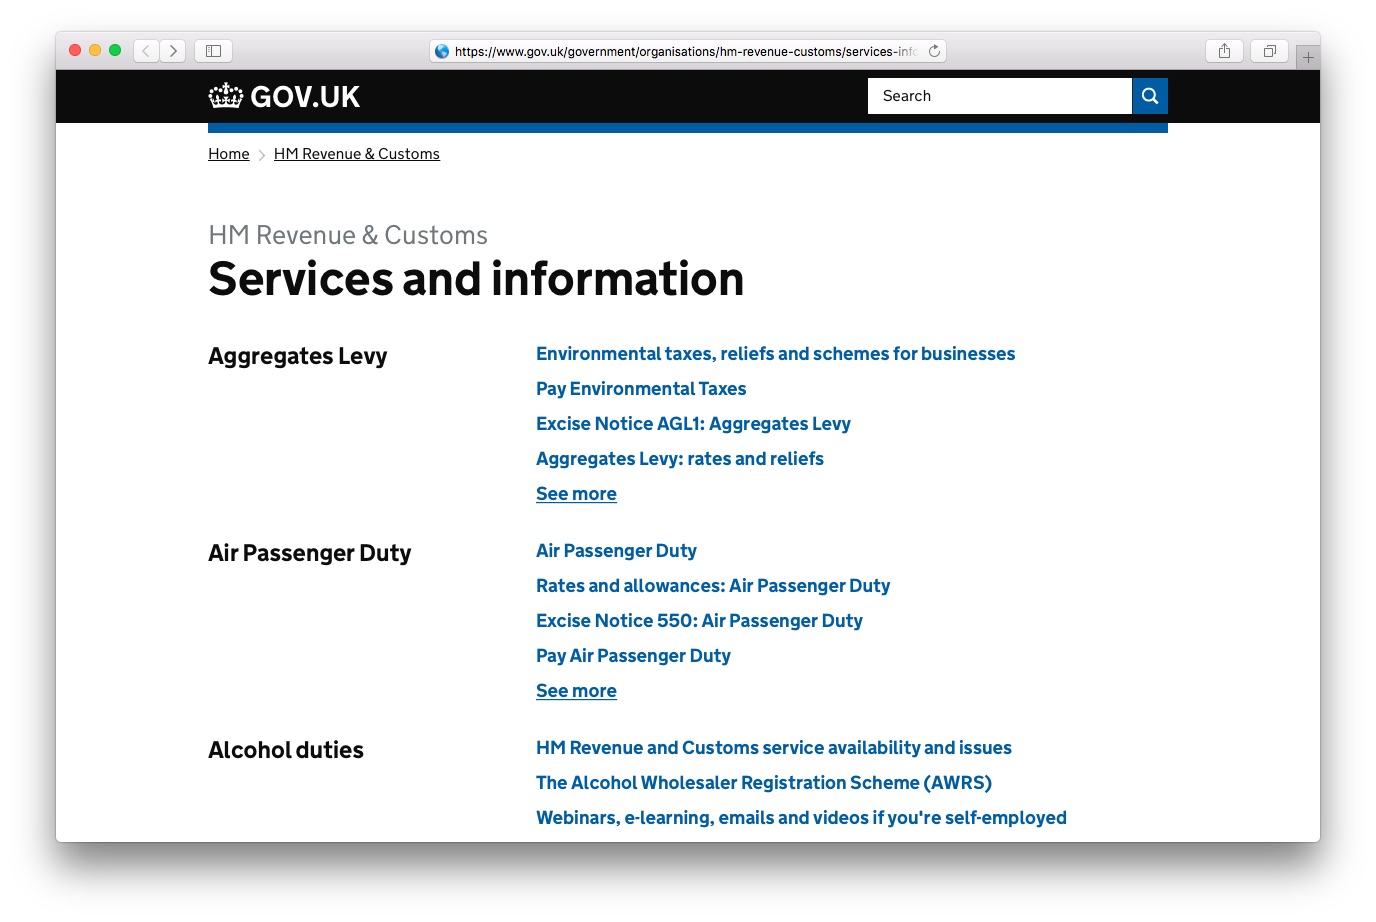 Services and information page